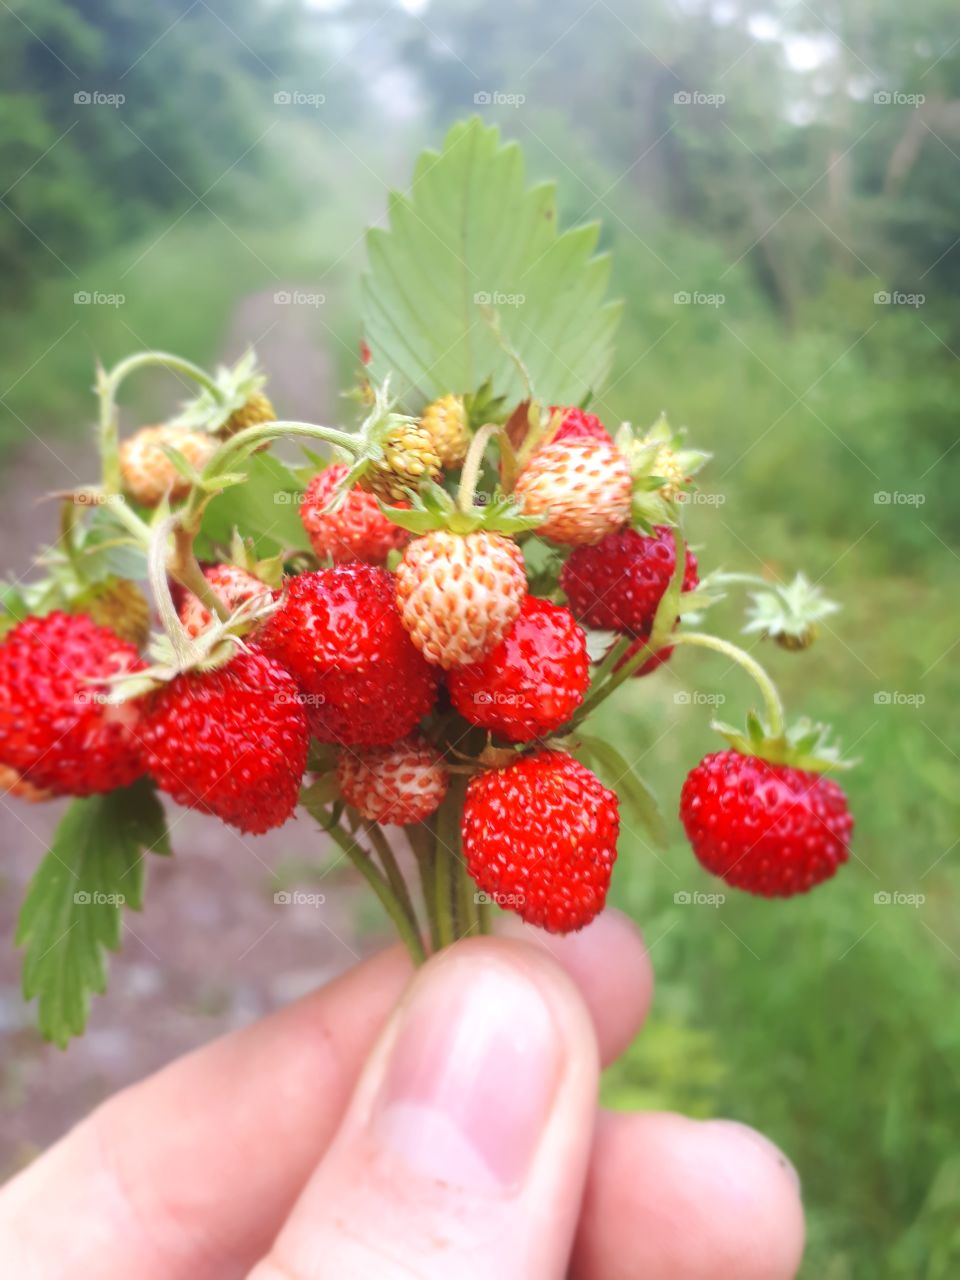 As a child I always liked to groom forest strawberries. And today I do it.It is a memory of childhood.It is the best smell of a forest strawberry, and no other can replace it.